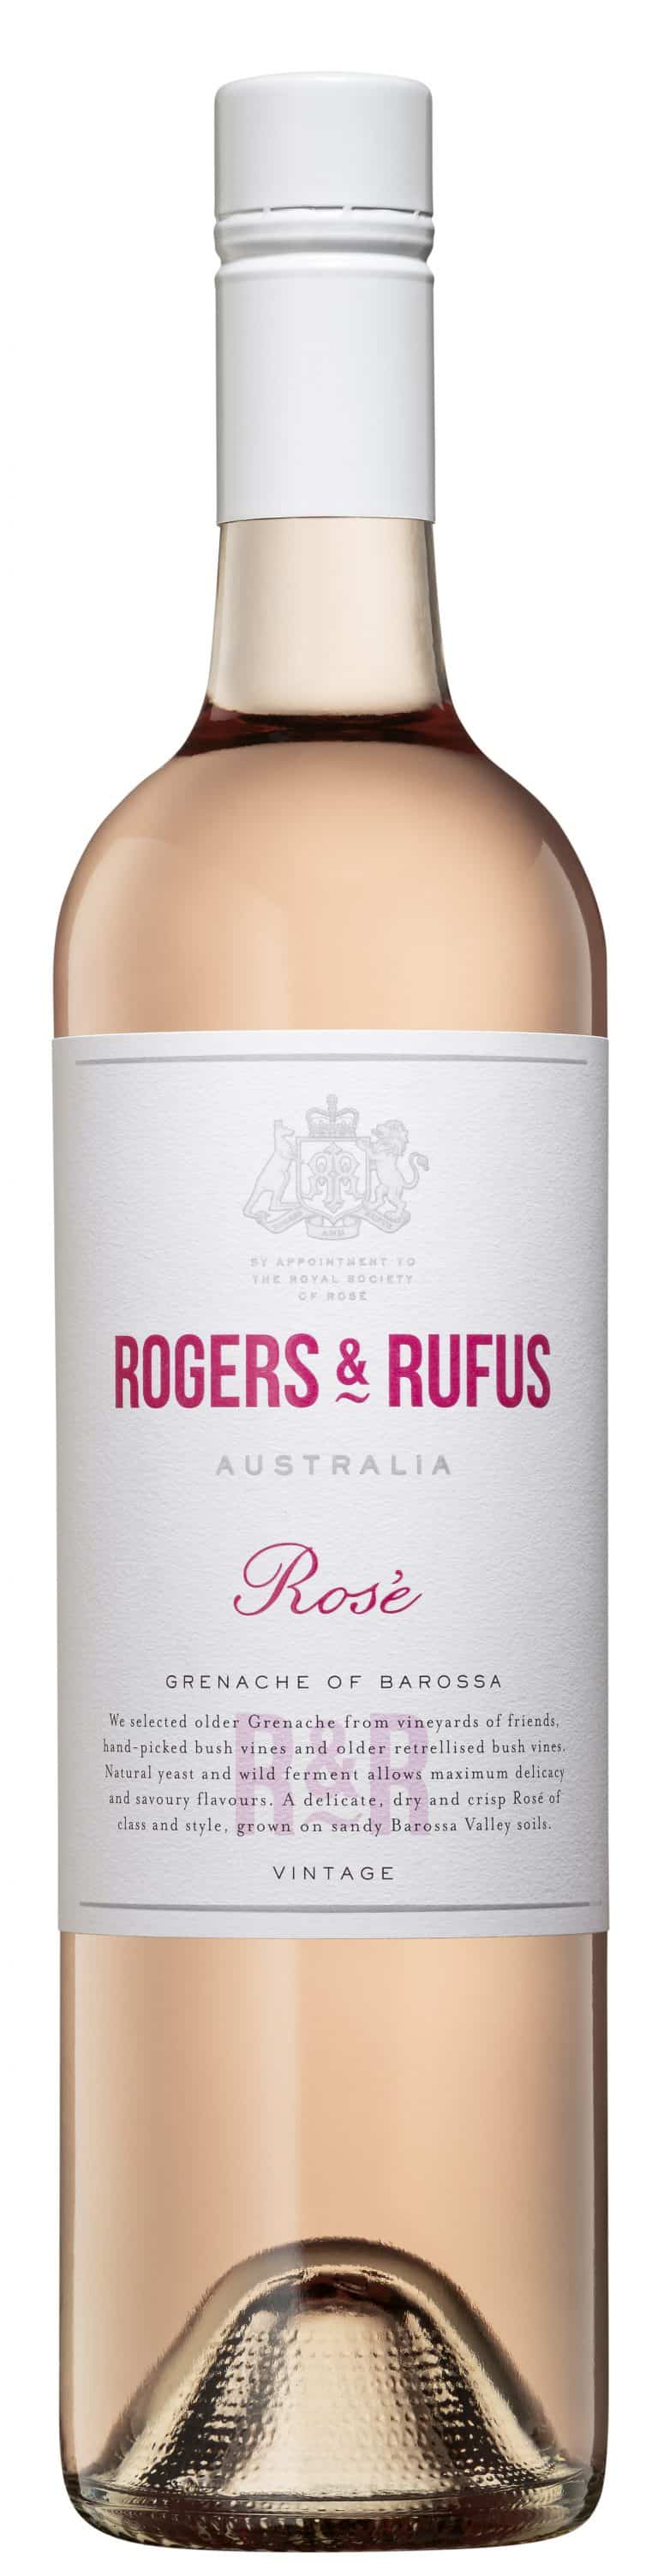 Rogers and Rufus Rose NO VINTAGE